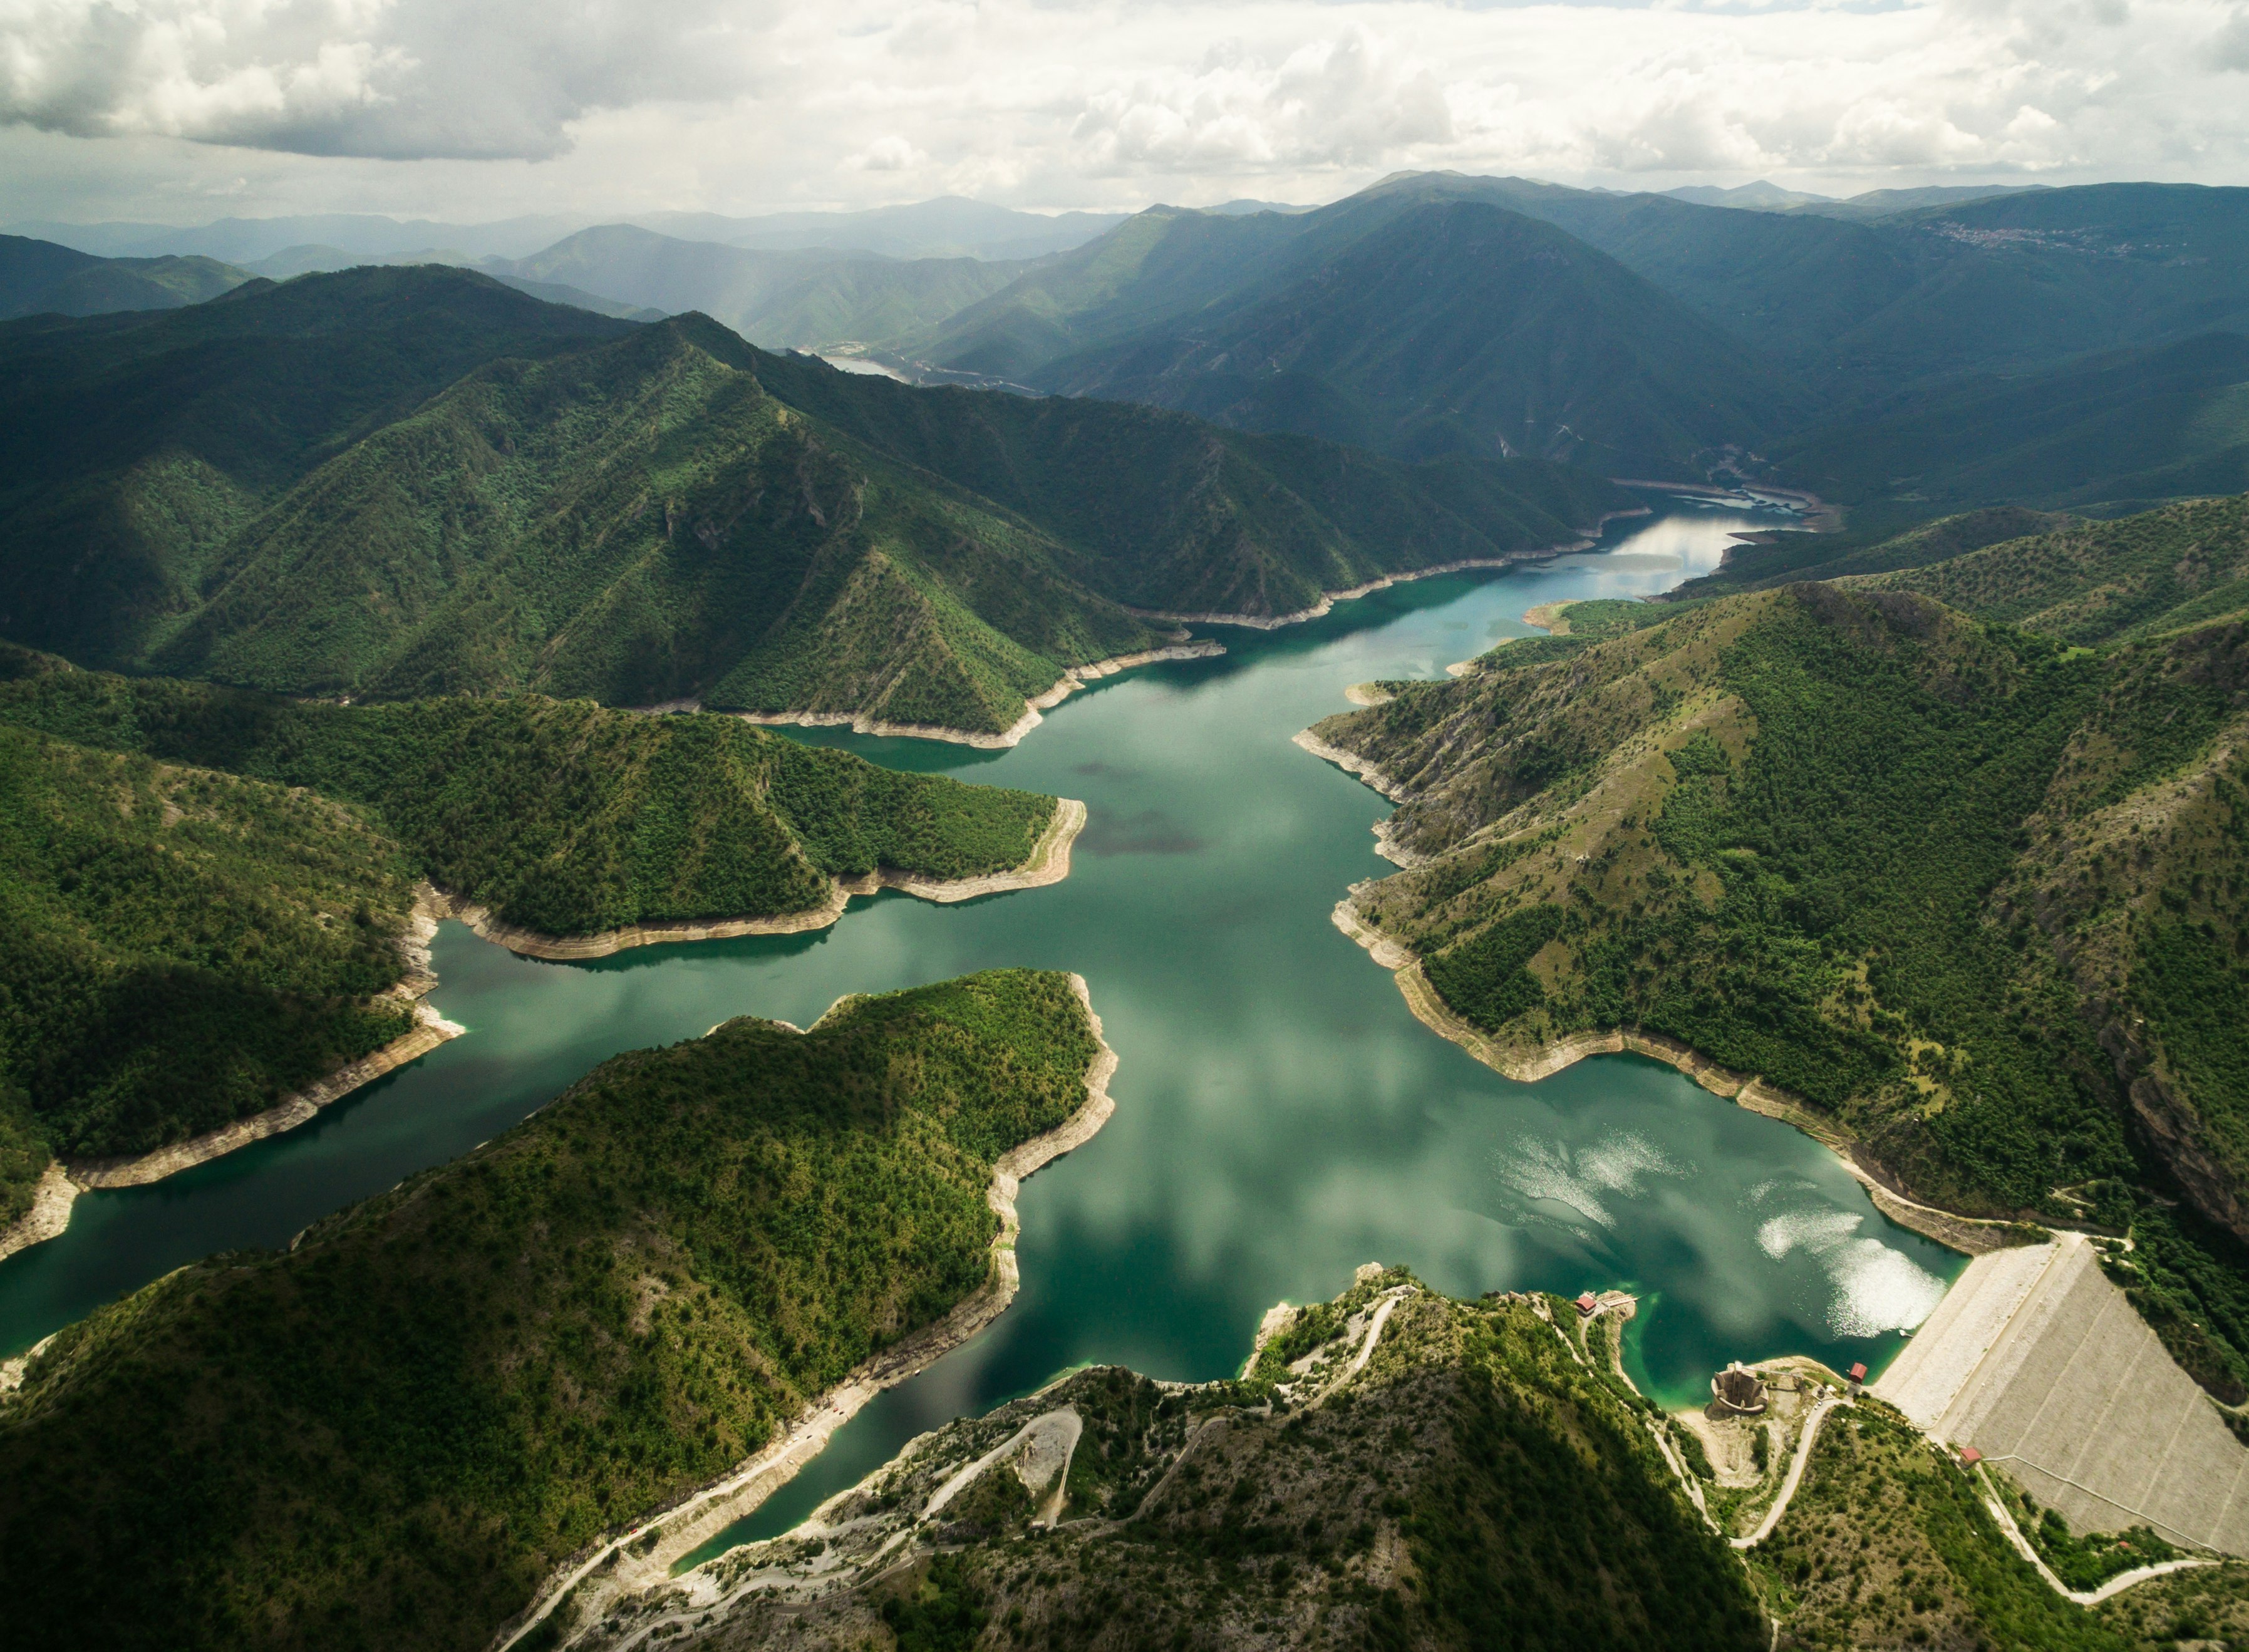 bird's eye view of river surrounded by mountains